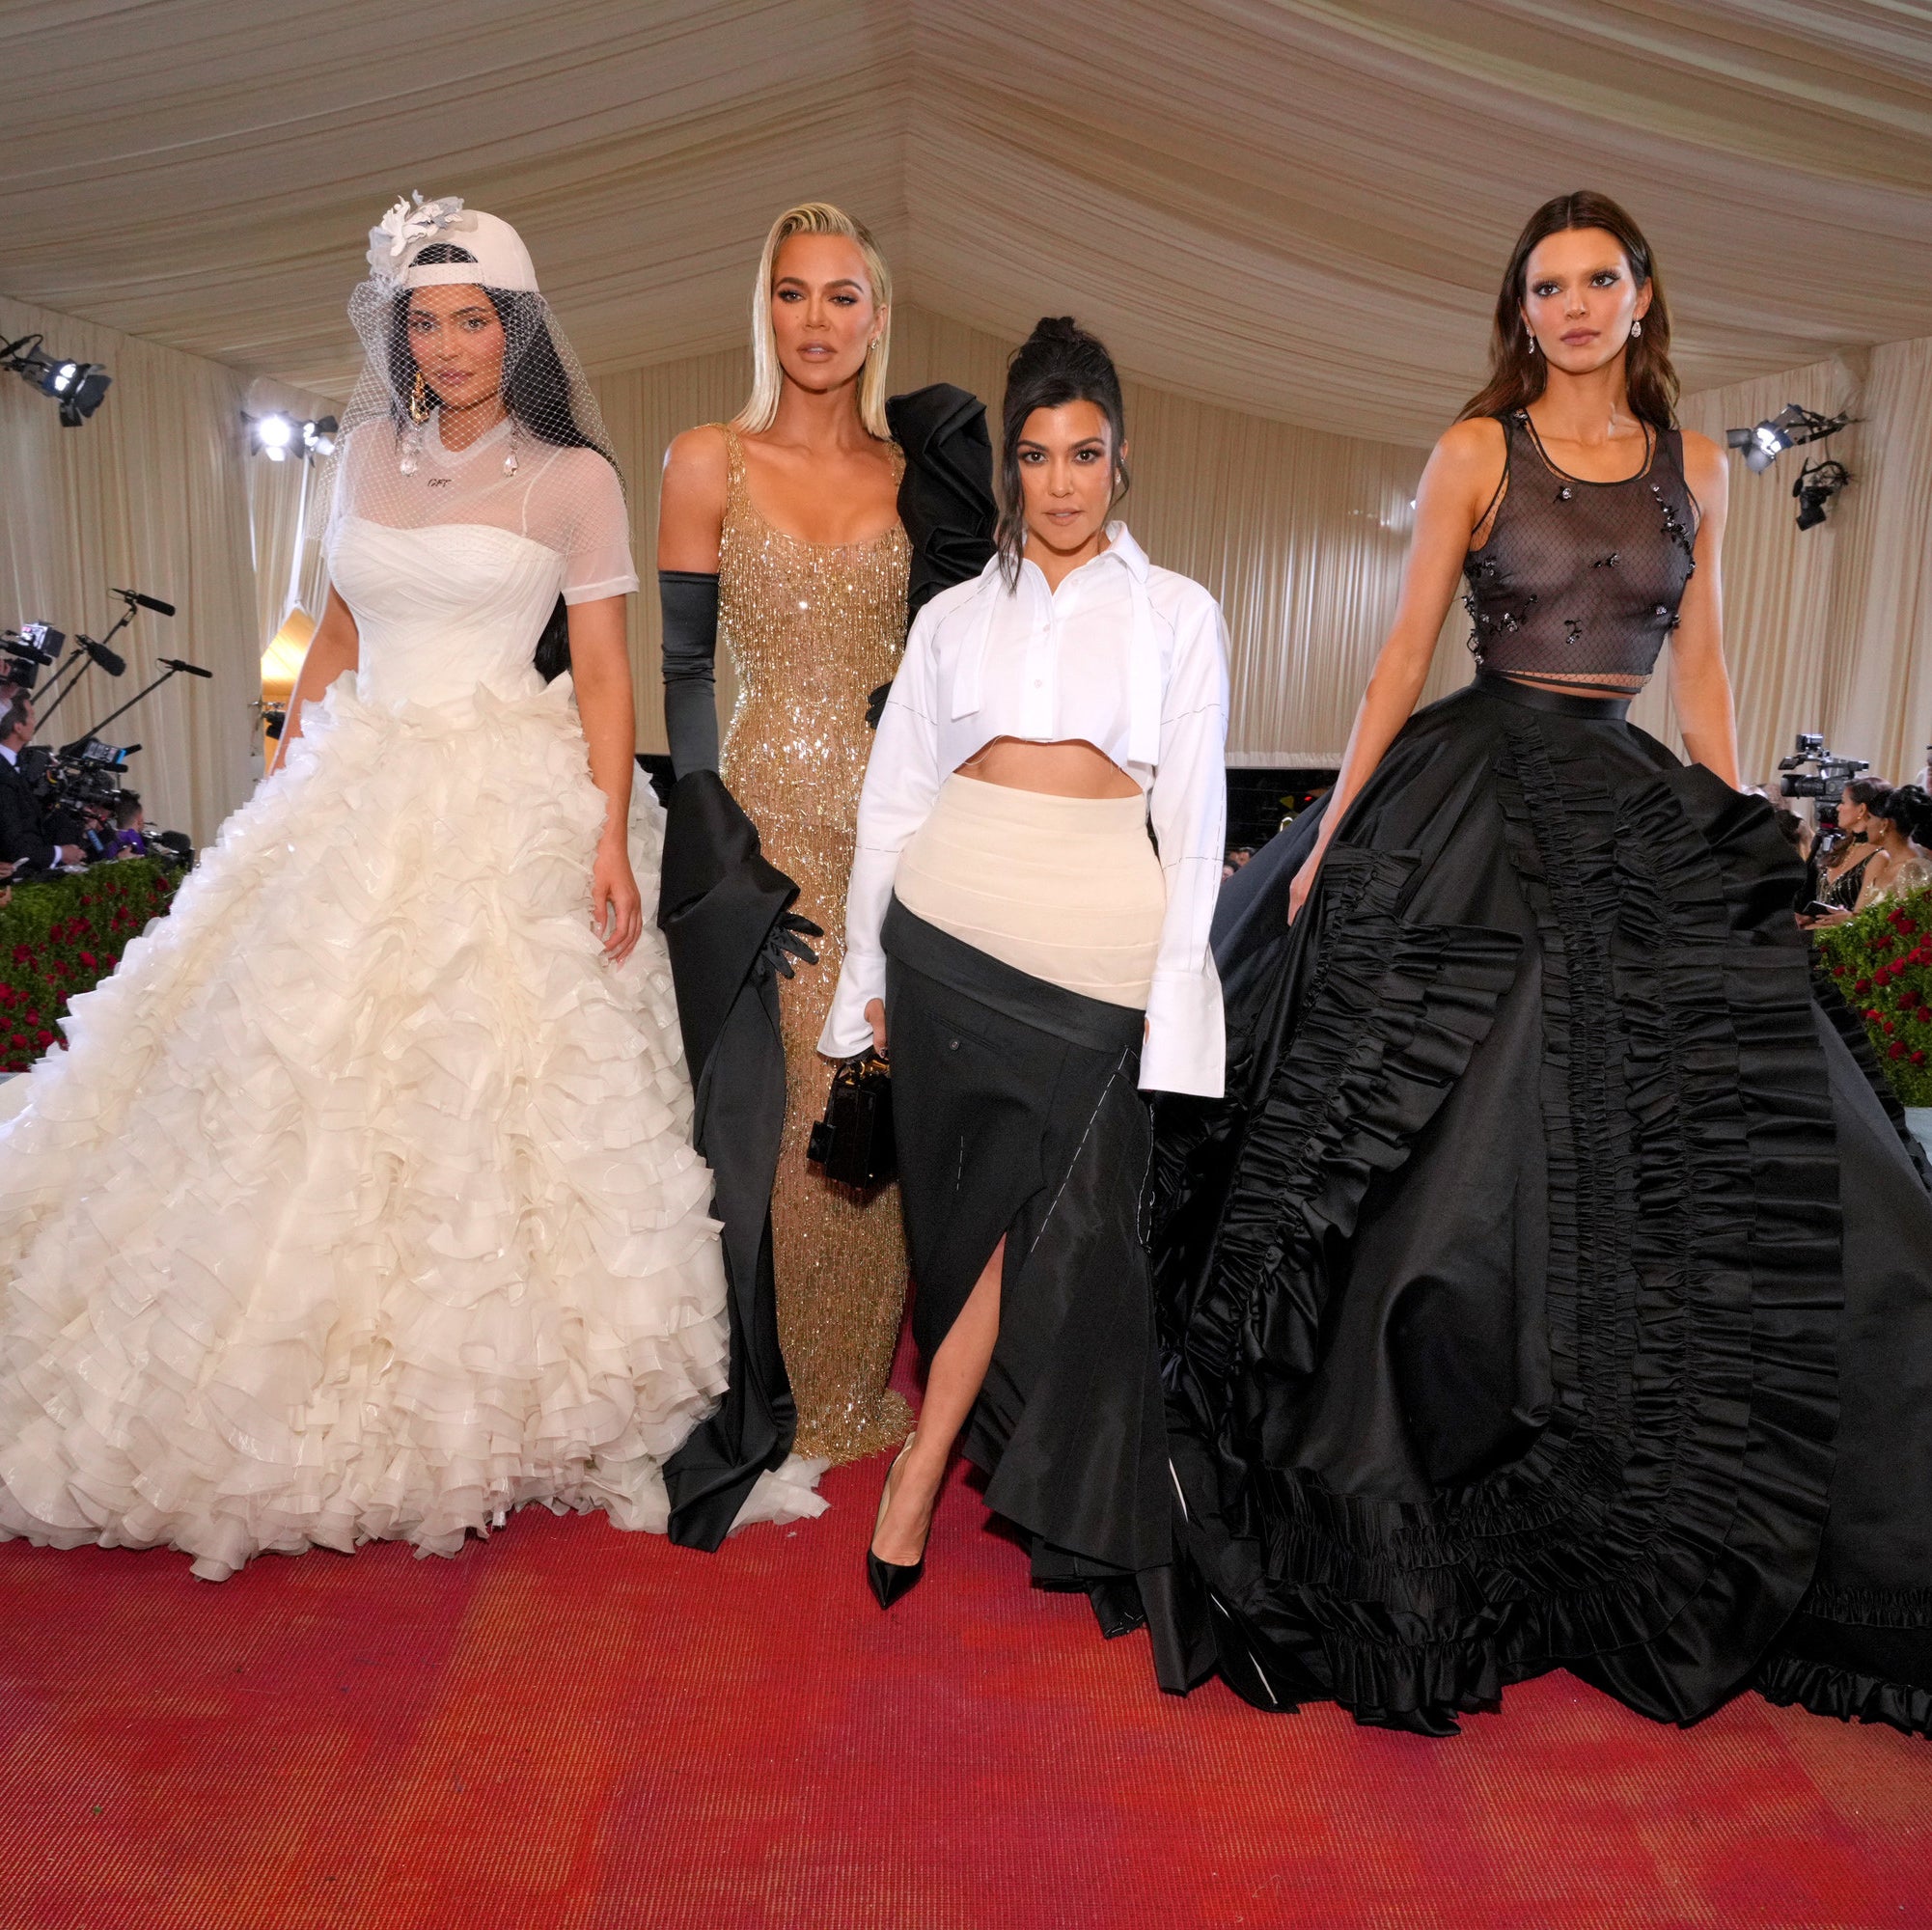 Kylie, Khloé, Kourtney, and Kendall on the red carpet